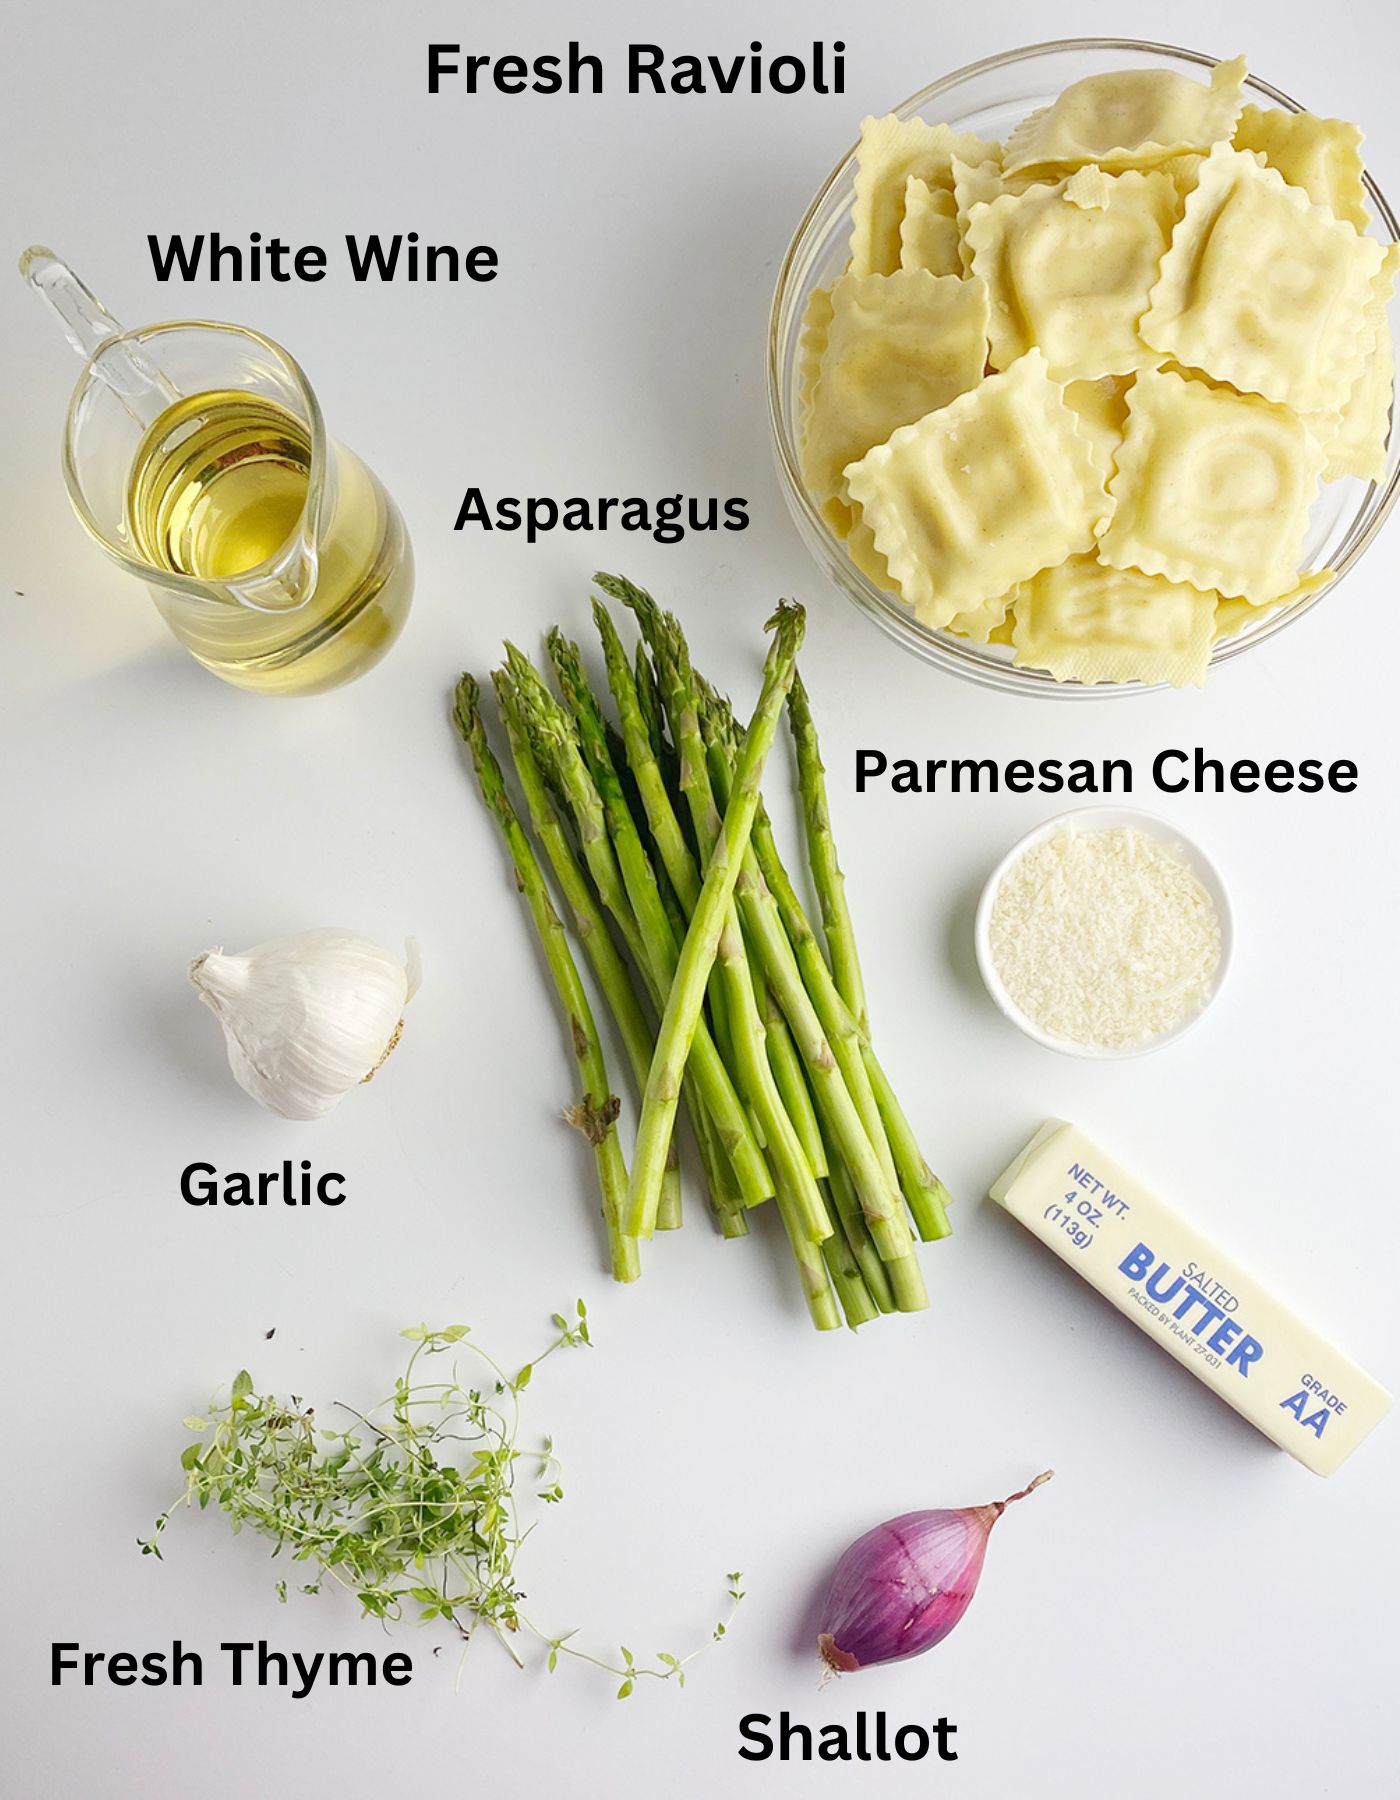 Ingredients for ravioli with white wine butter sauce